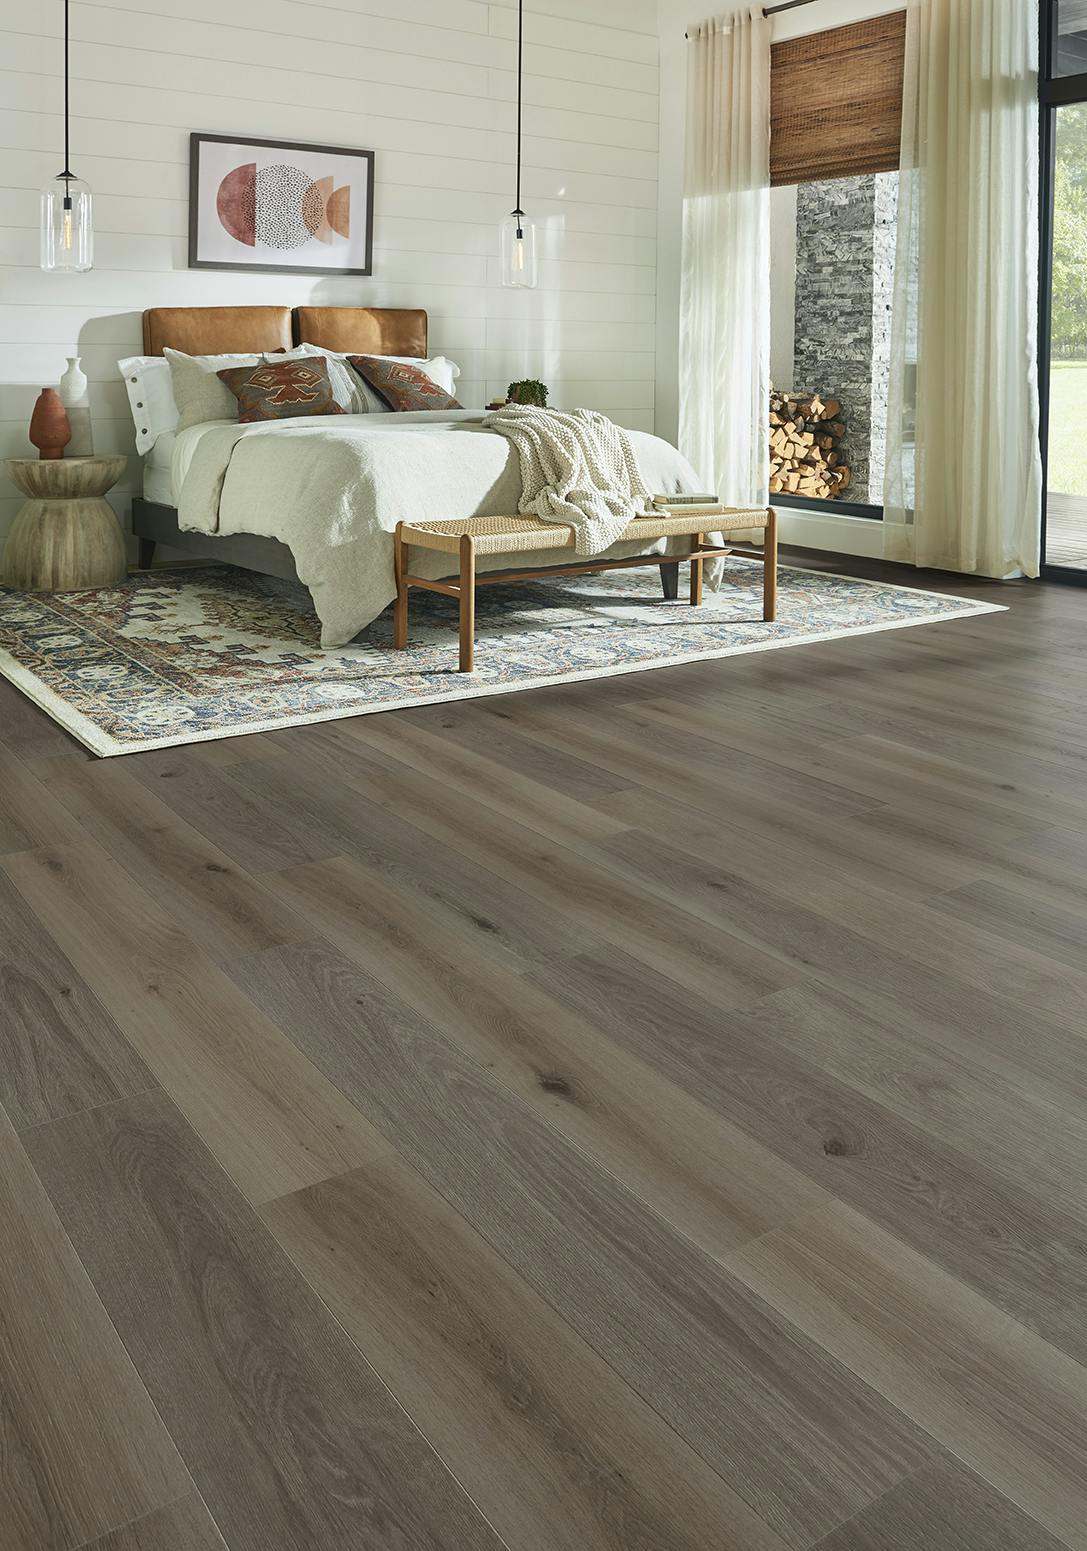 Your Home Care Guide: How to Clean Vinyl Flooring - Twenty & Oak